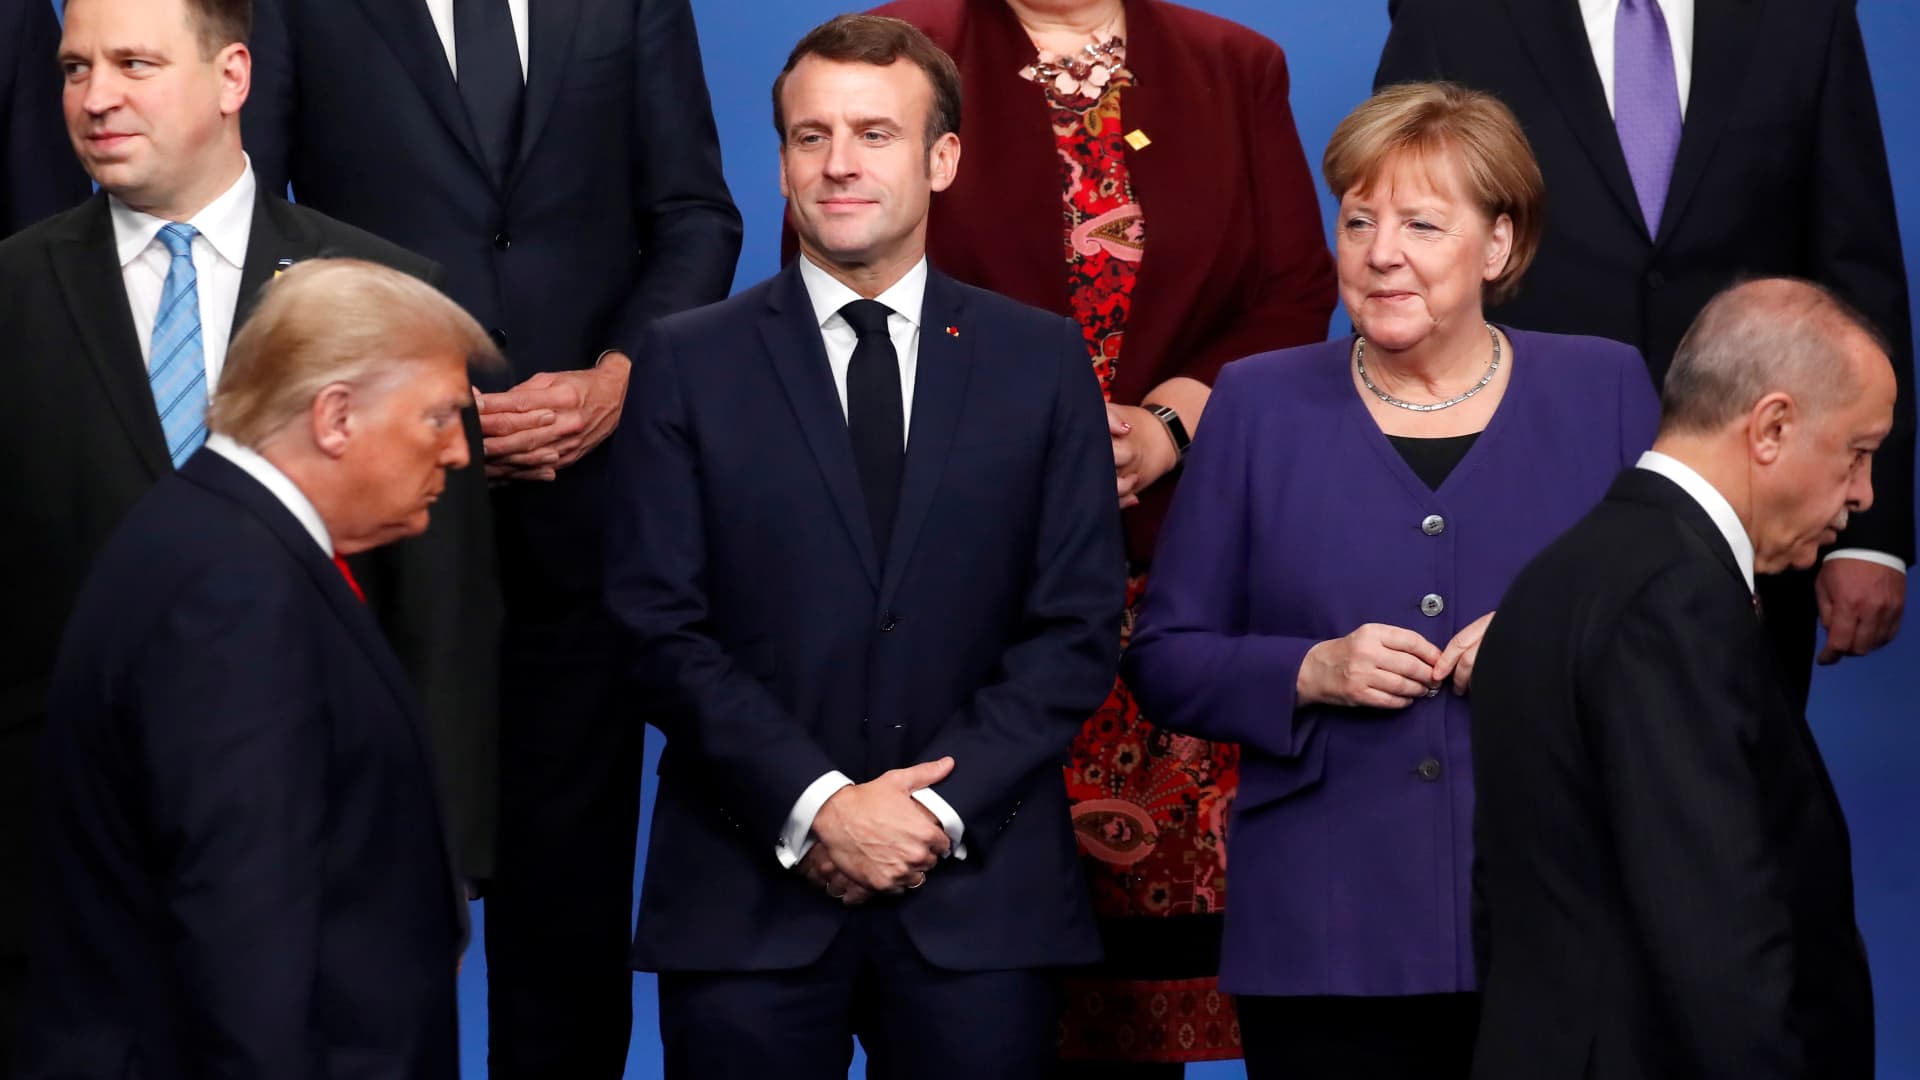 France's President Emmanuel Macron (2nd L) and Germany's Chancellor Angela Merkel (R) look at US President Donald Trump (front L) and Turkey's President Recep Tayyip Erdogan (front R) walking past them during a family photo as part of the NATO summit at the Grove hotel in Watford, northeast of London on December 4, 2019.